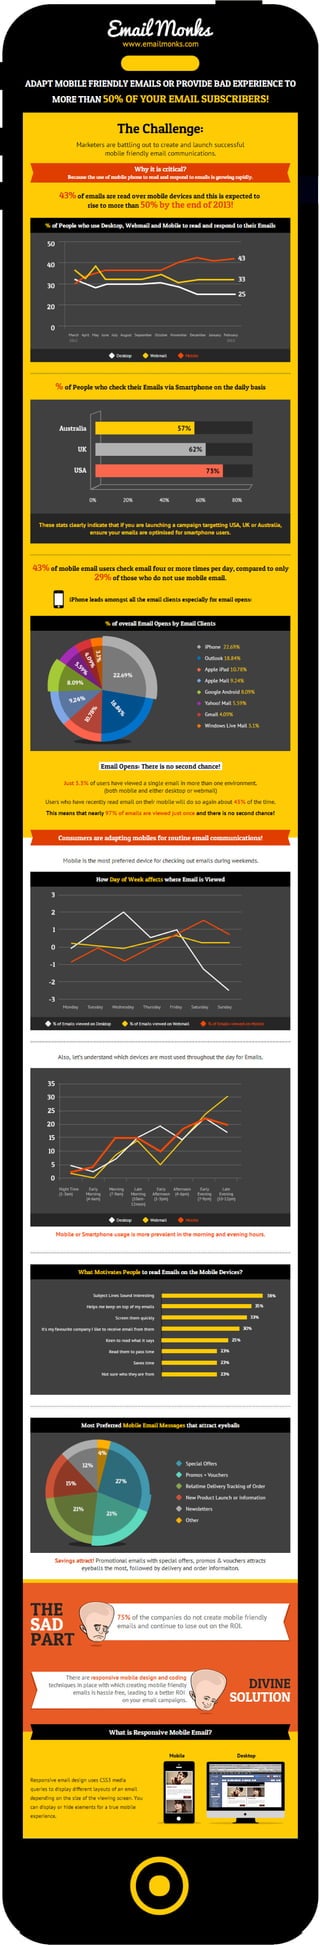 Adapt to mobile friendly emails - an infographic on mobile emails